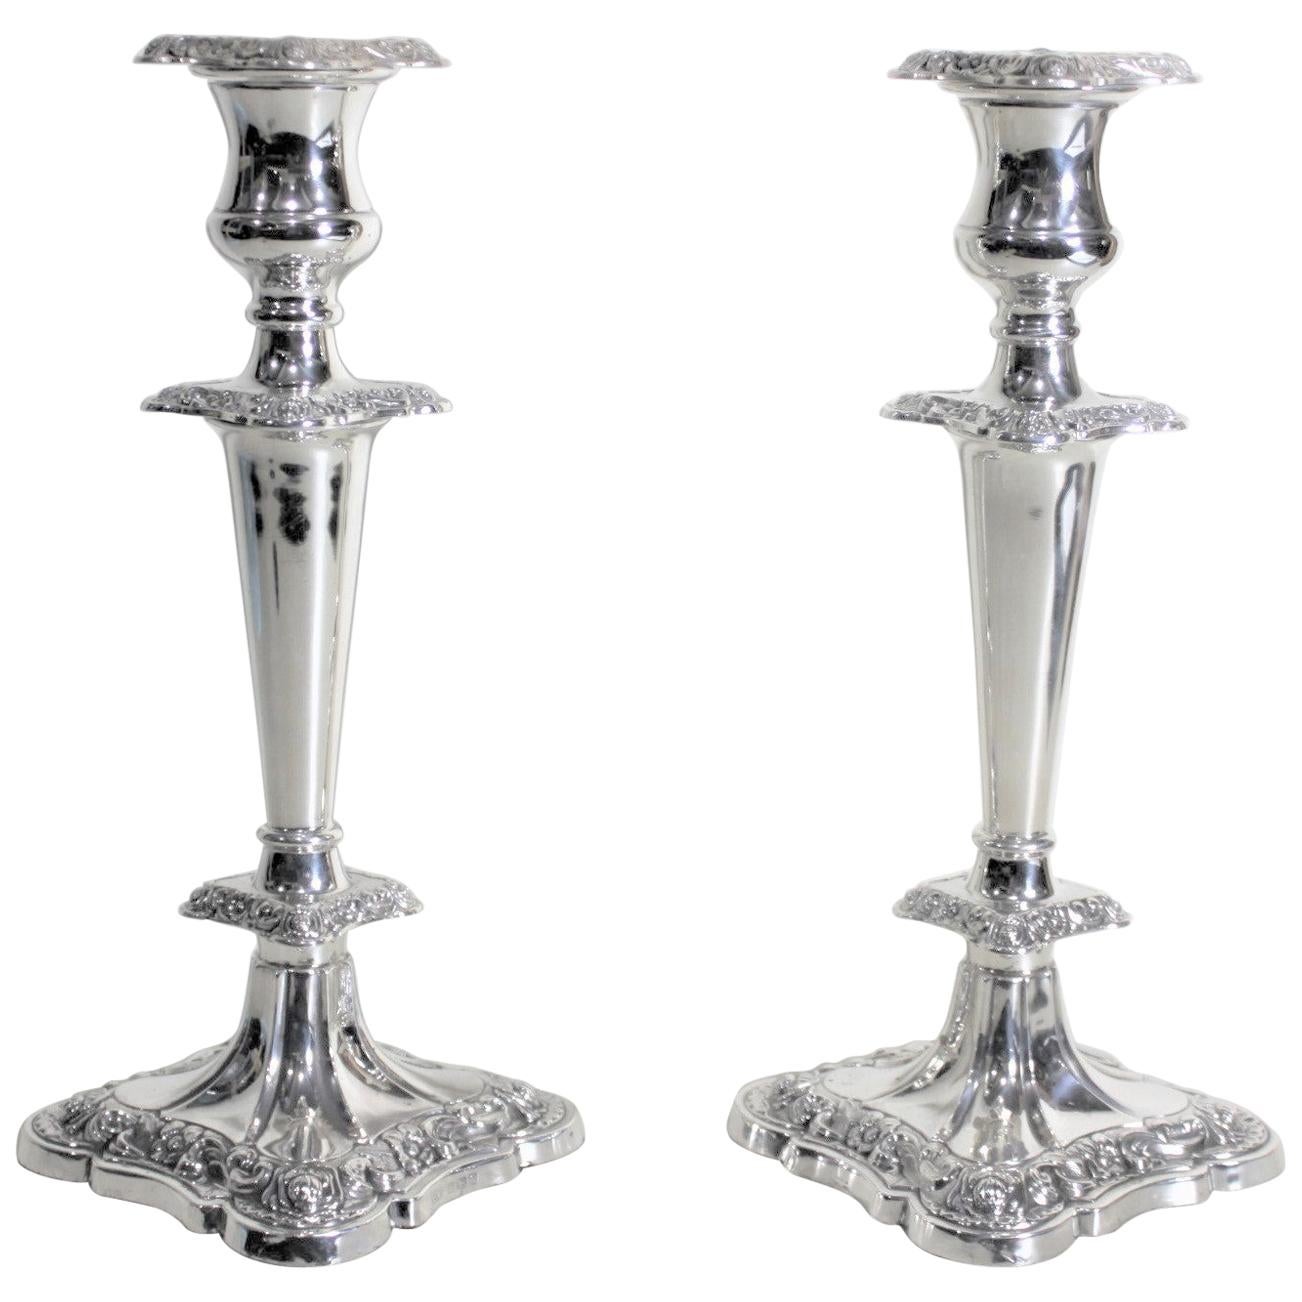 Pair of English Sterling Silver Candlesticks with Chased Floral Decoration